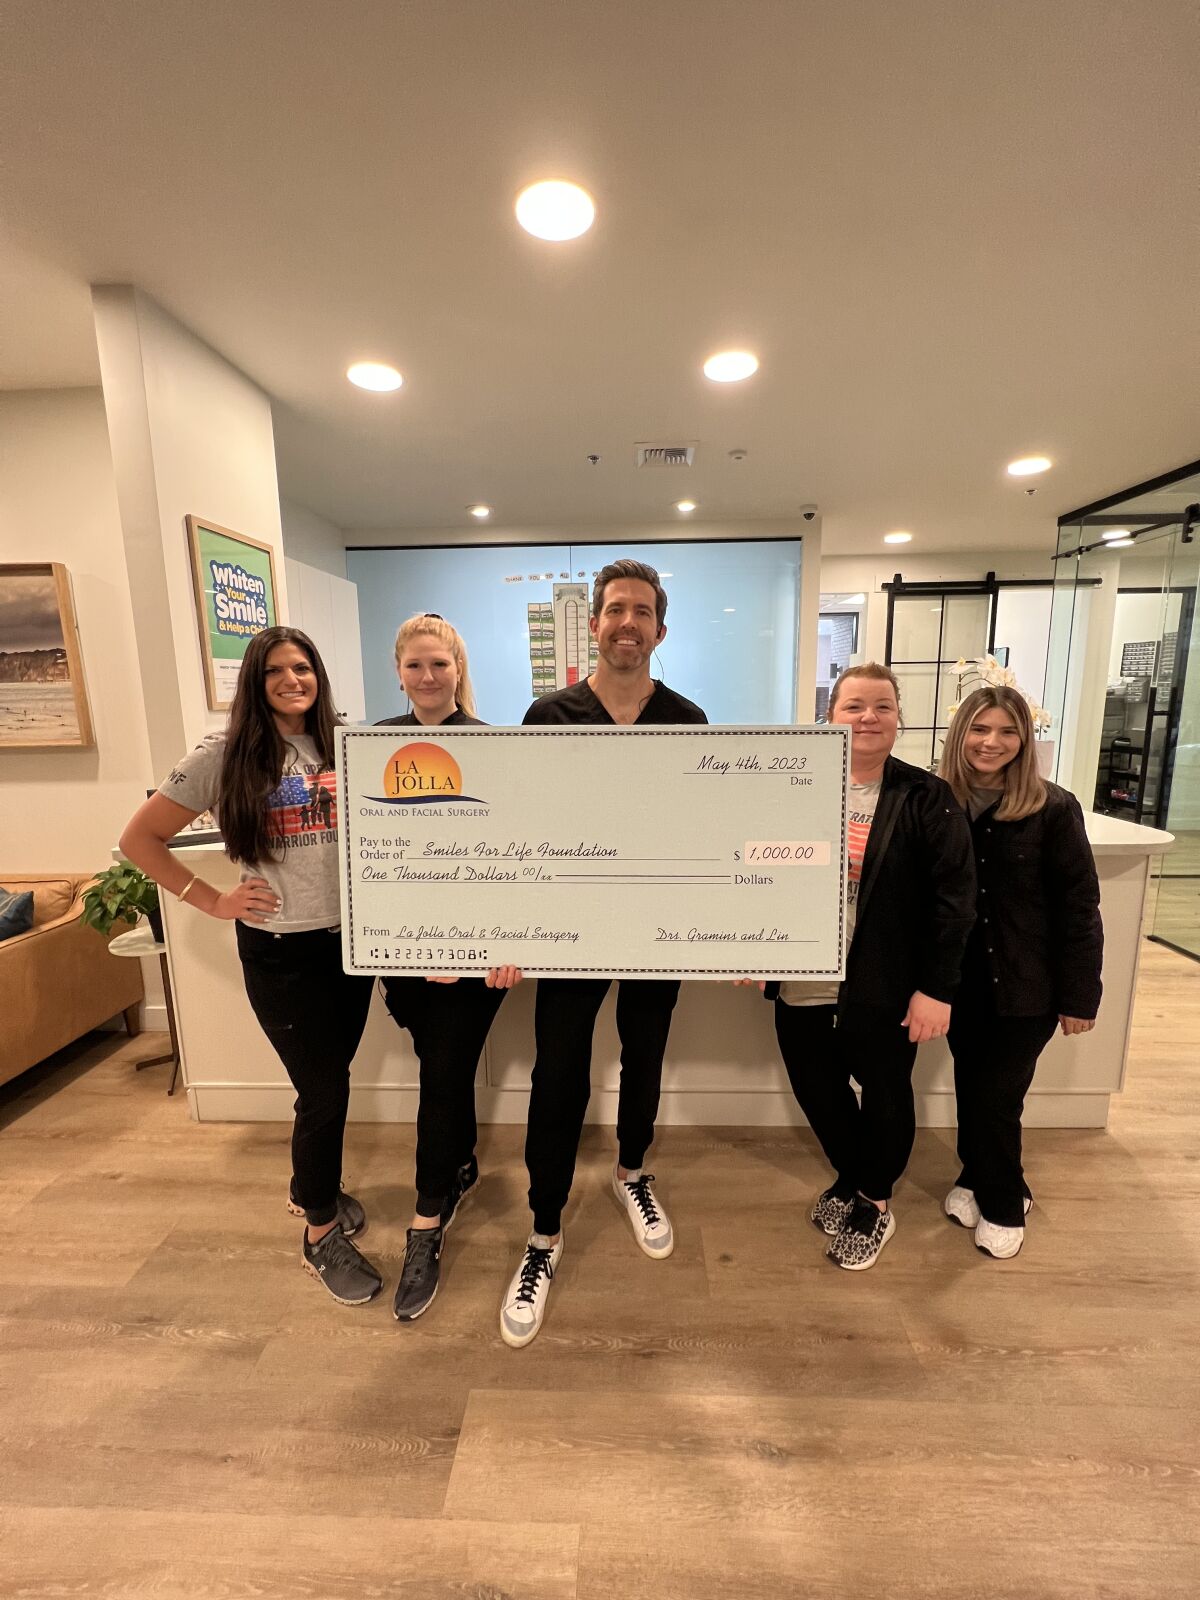 Dentist Weston Spencer and staff show a donation check from La Jolla Oral and Facial Surgery for Spencer's charity campaign.